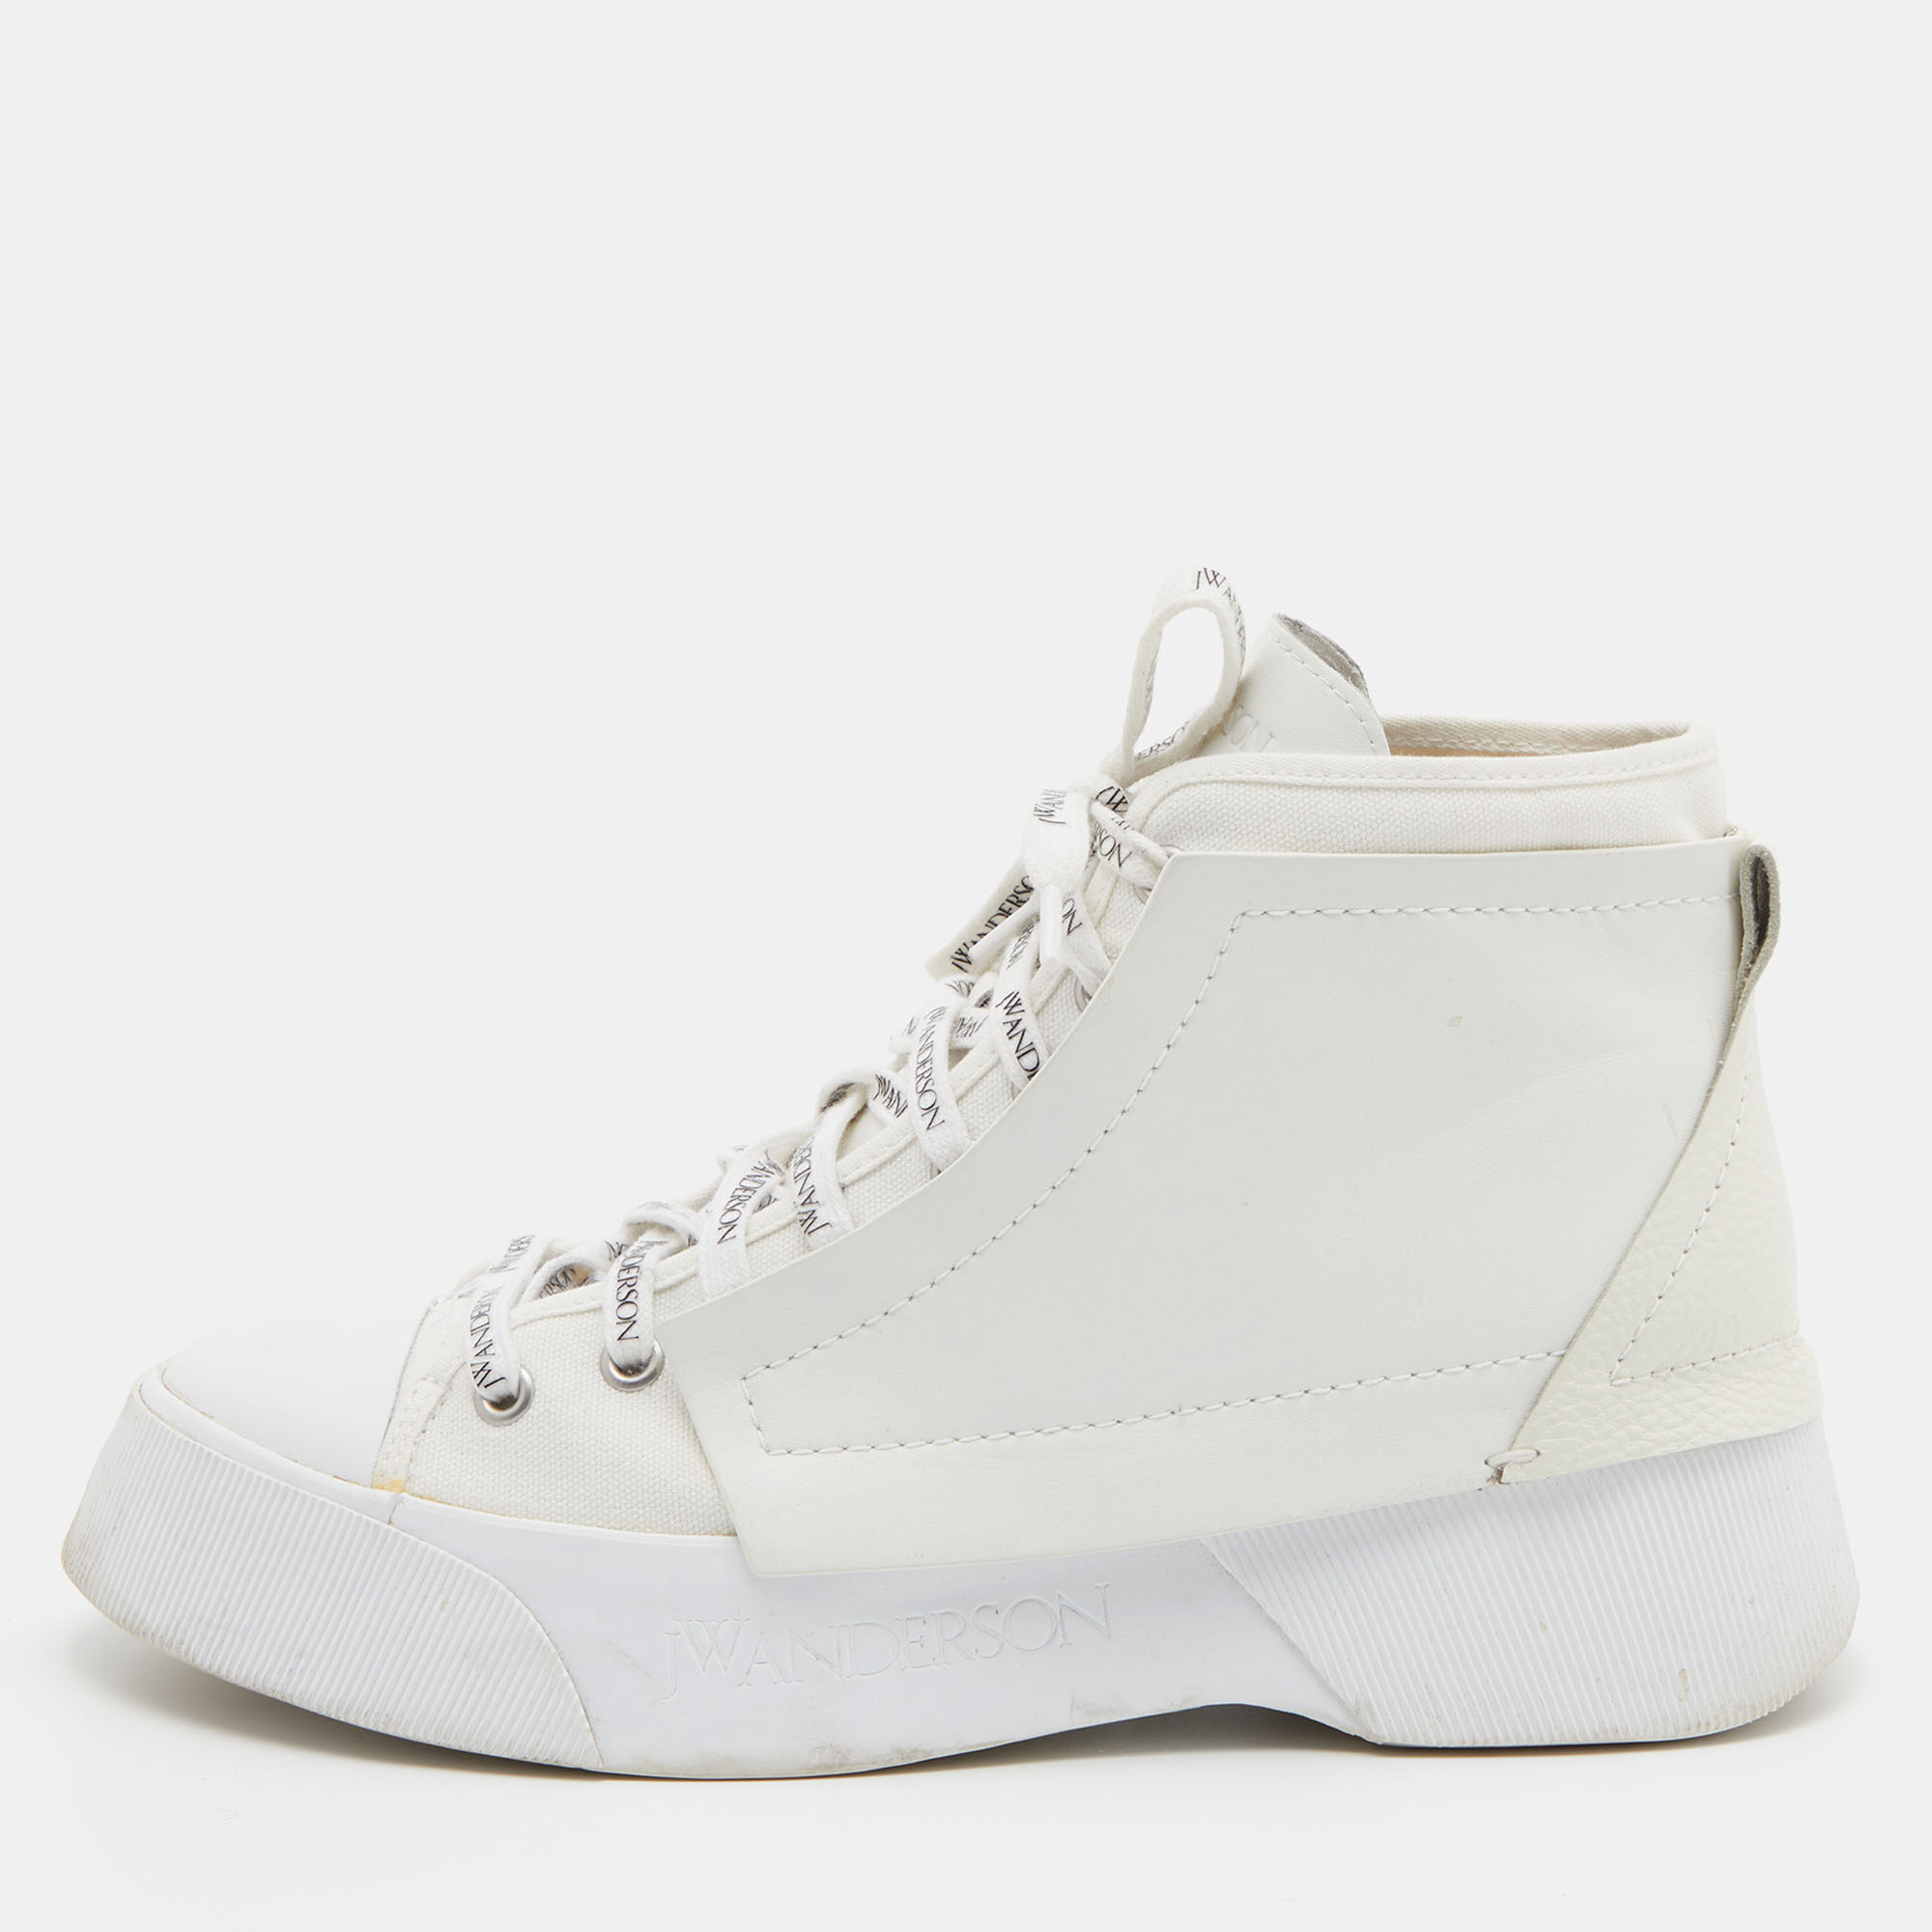 Pre-owned Jw Anderson J.w. Anderson White Leather And Canvasl Ace Up Sneakers Size 41